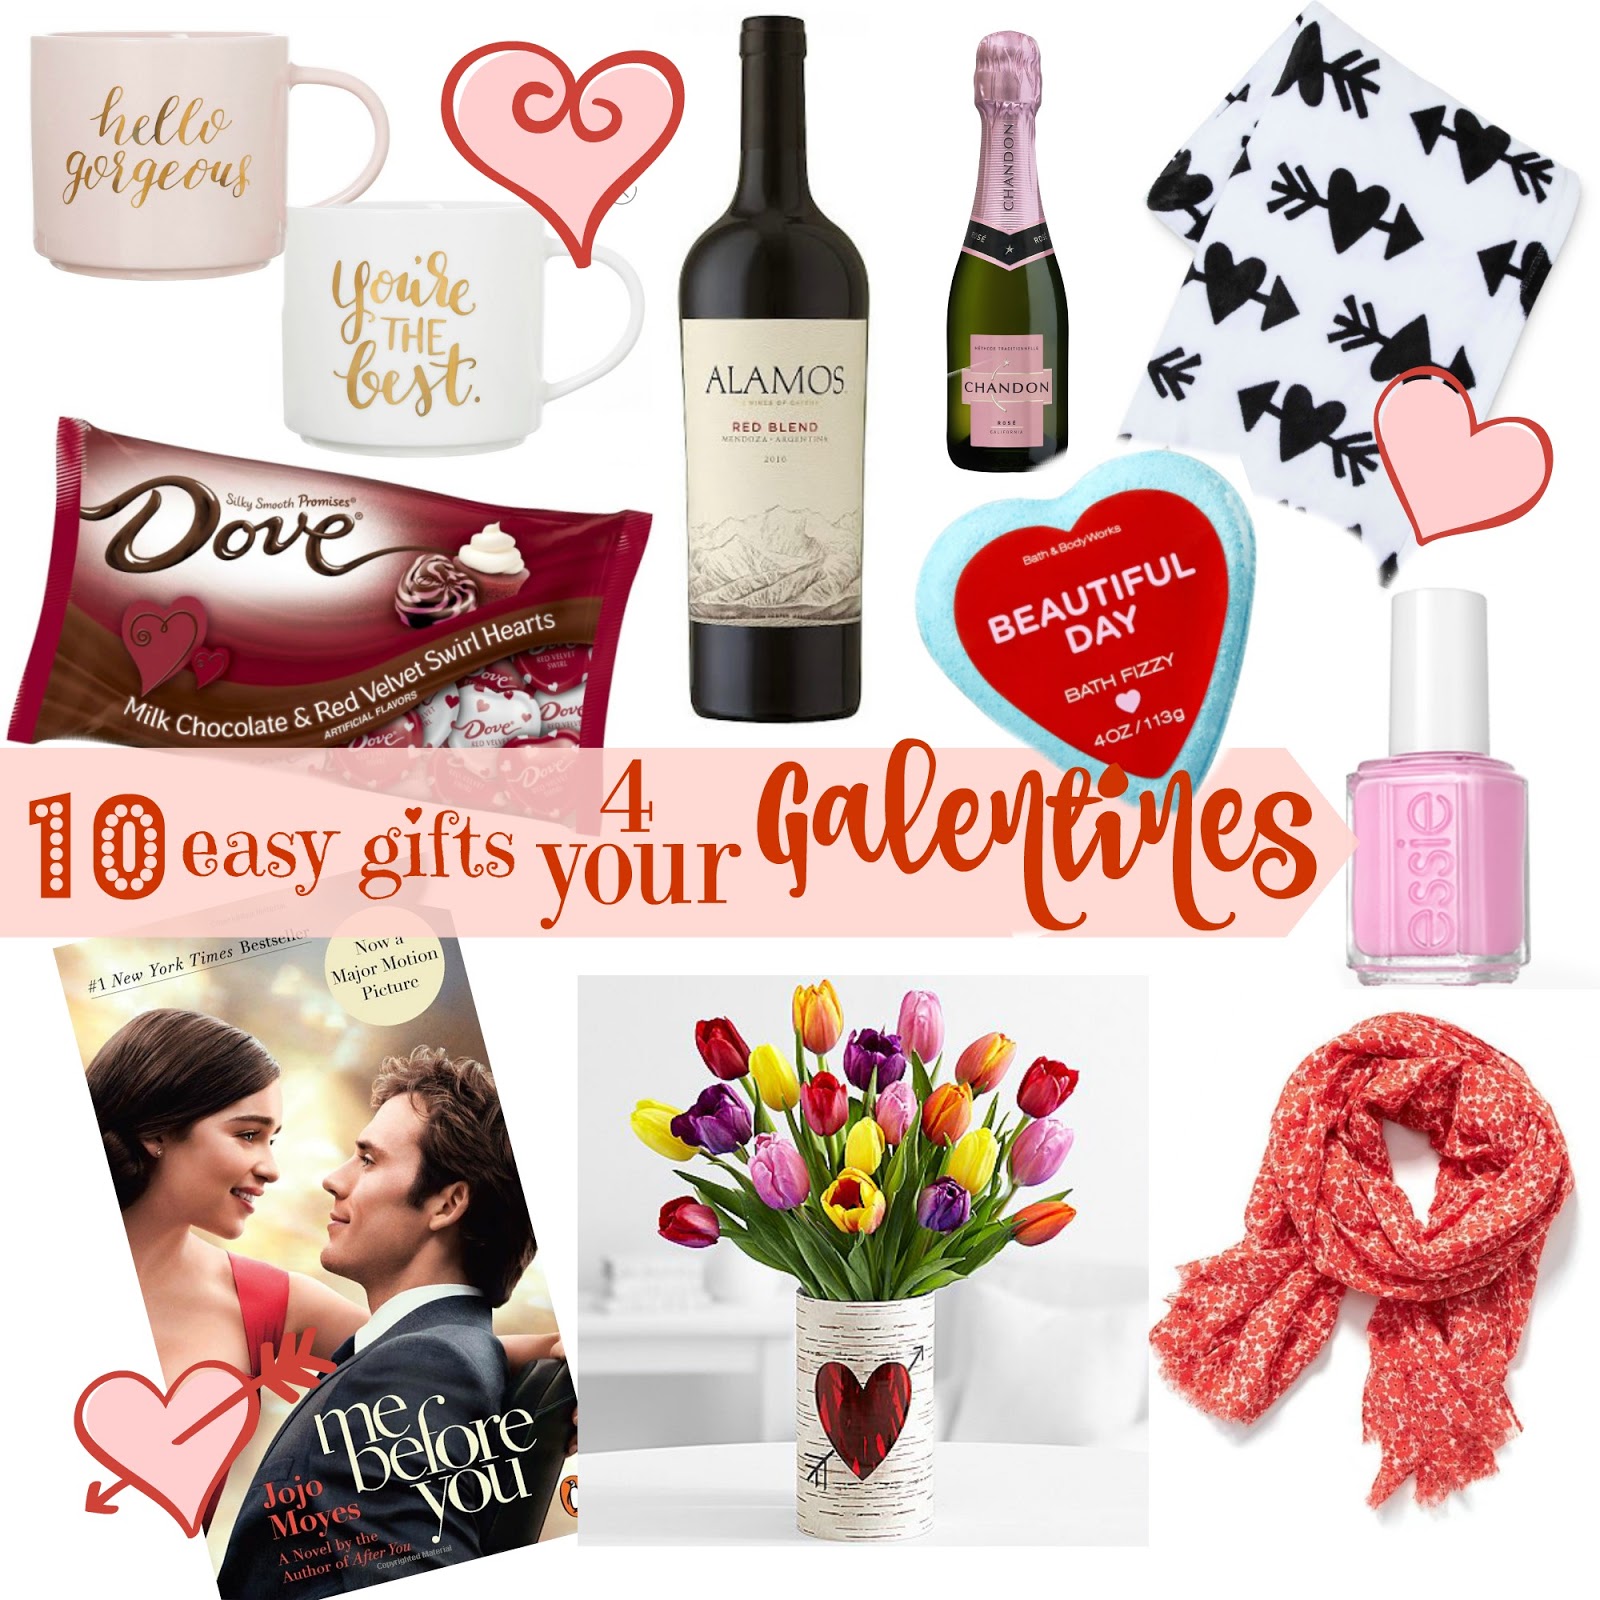 Galentines Day Gifts - The Queen In Between